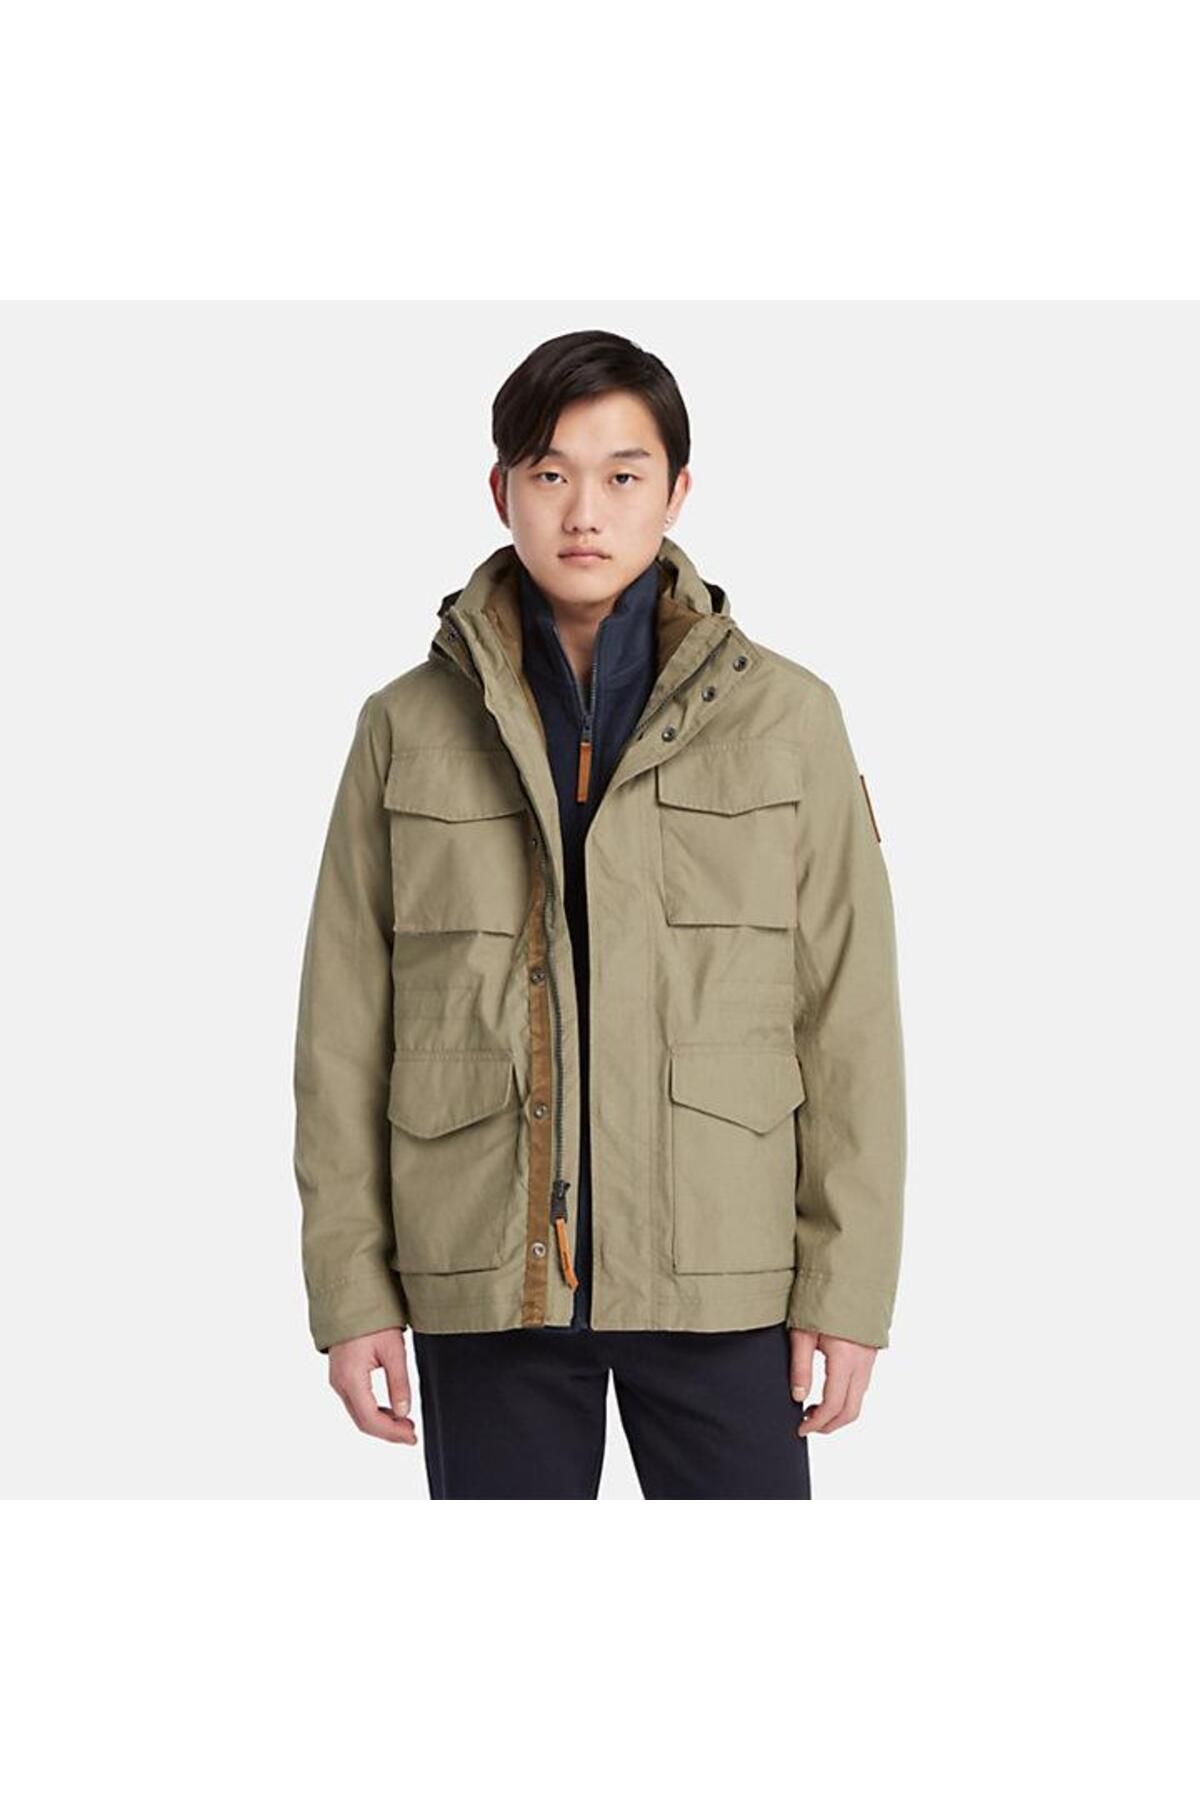 Timberland TİMBERLAND Abington WR 3in1 Field Jacket TB0A6NDW5901